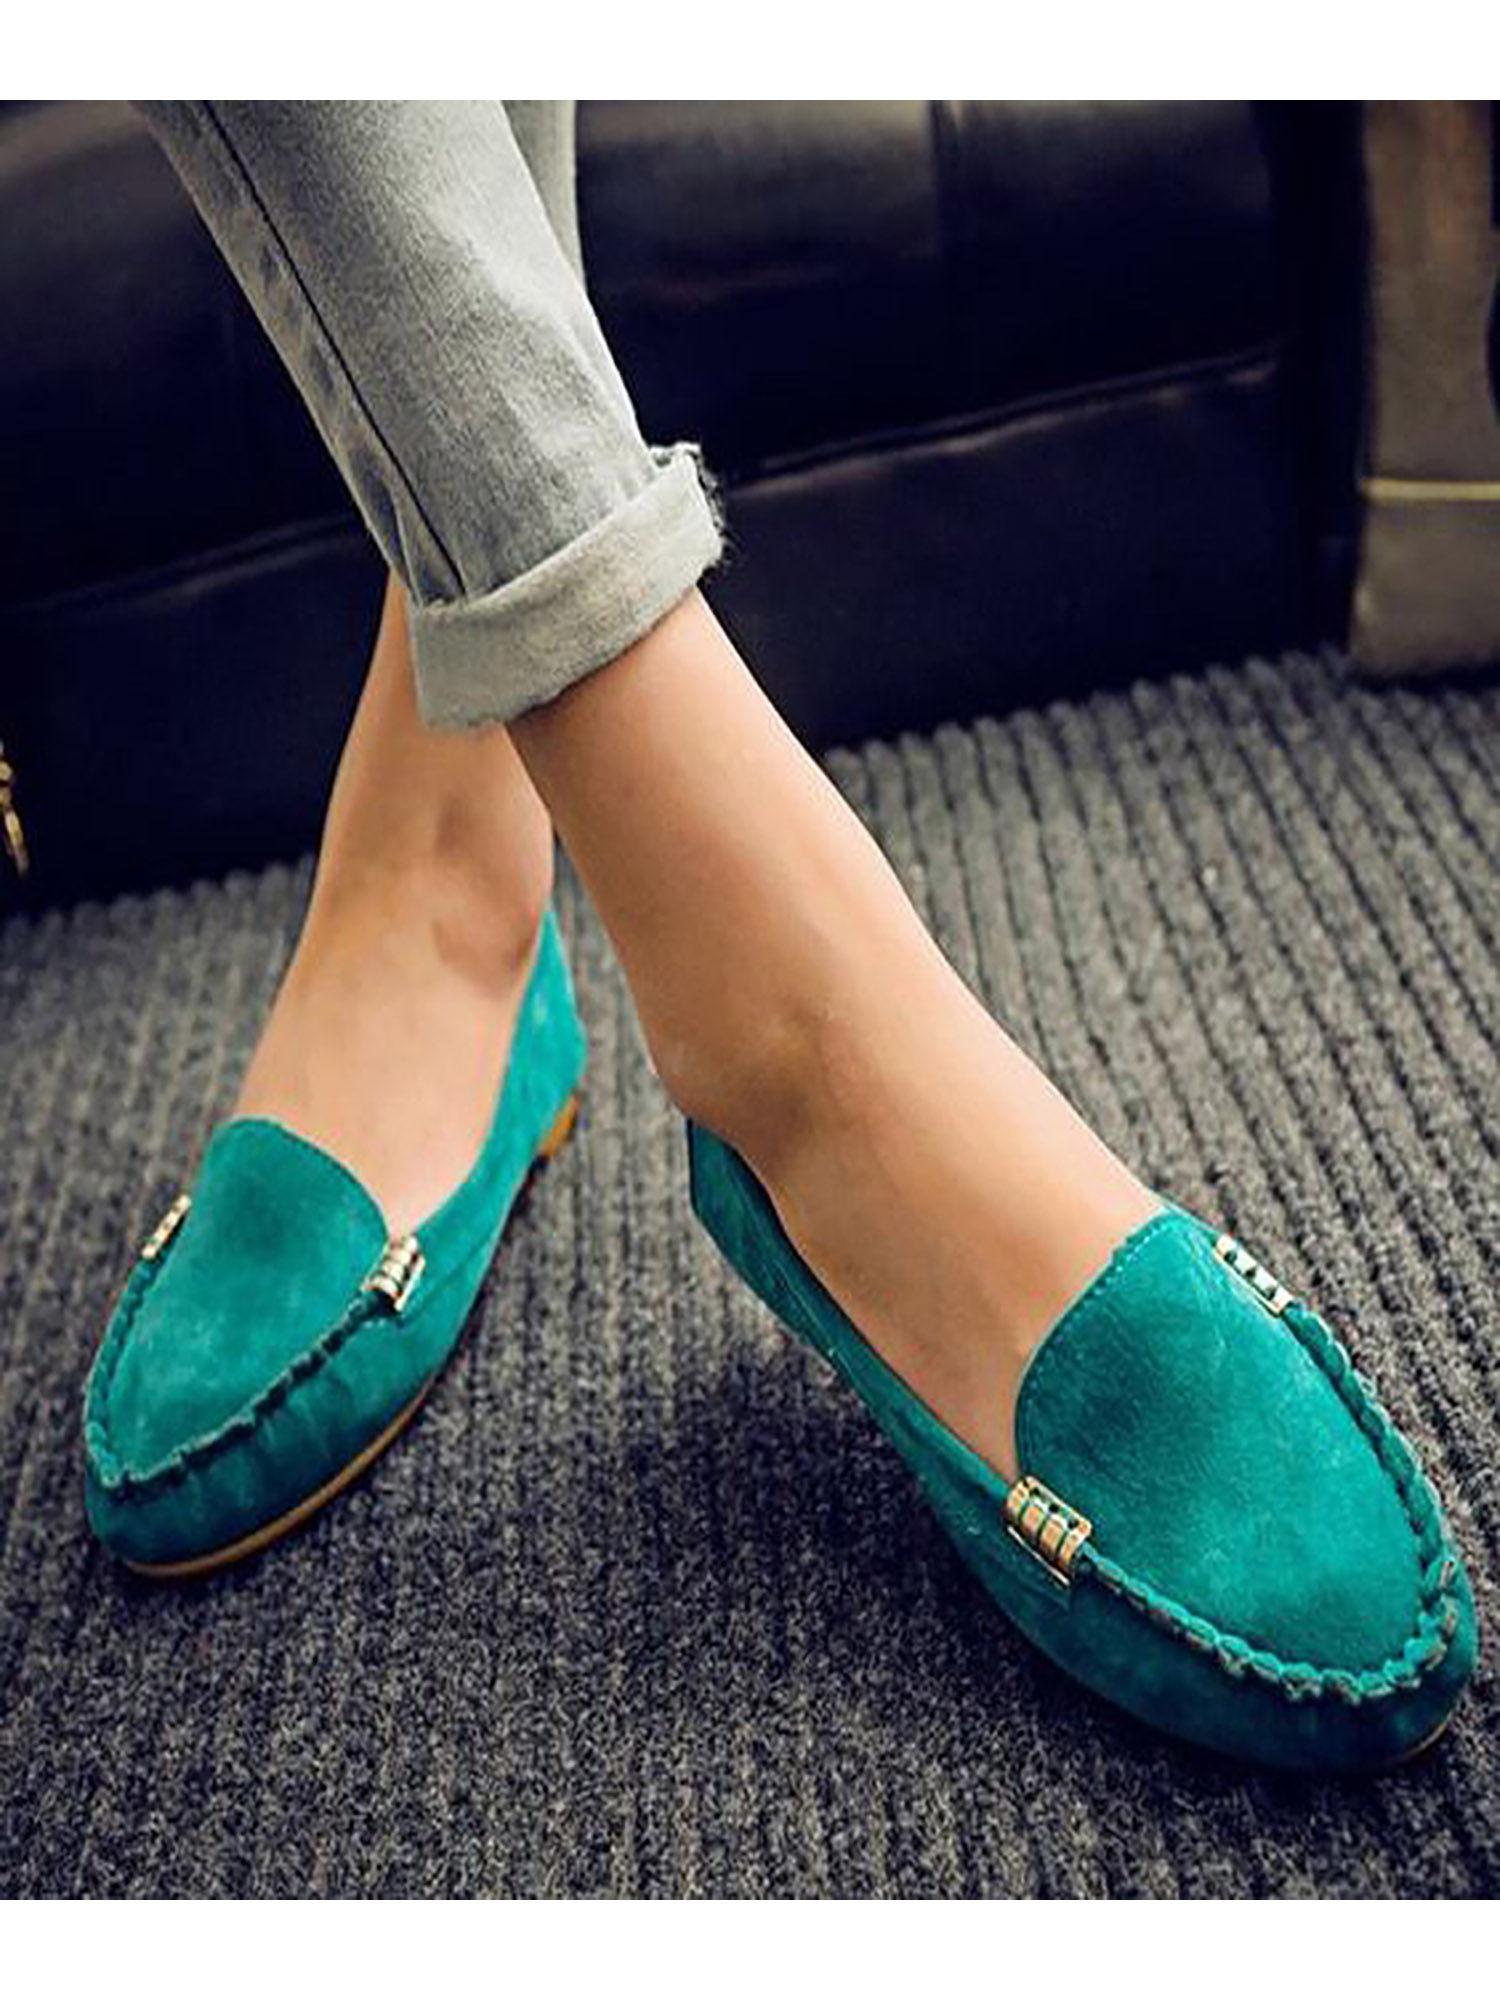 loafers for women turquoise